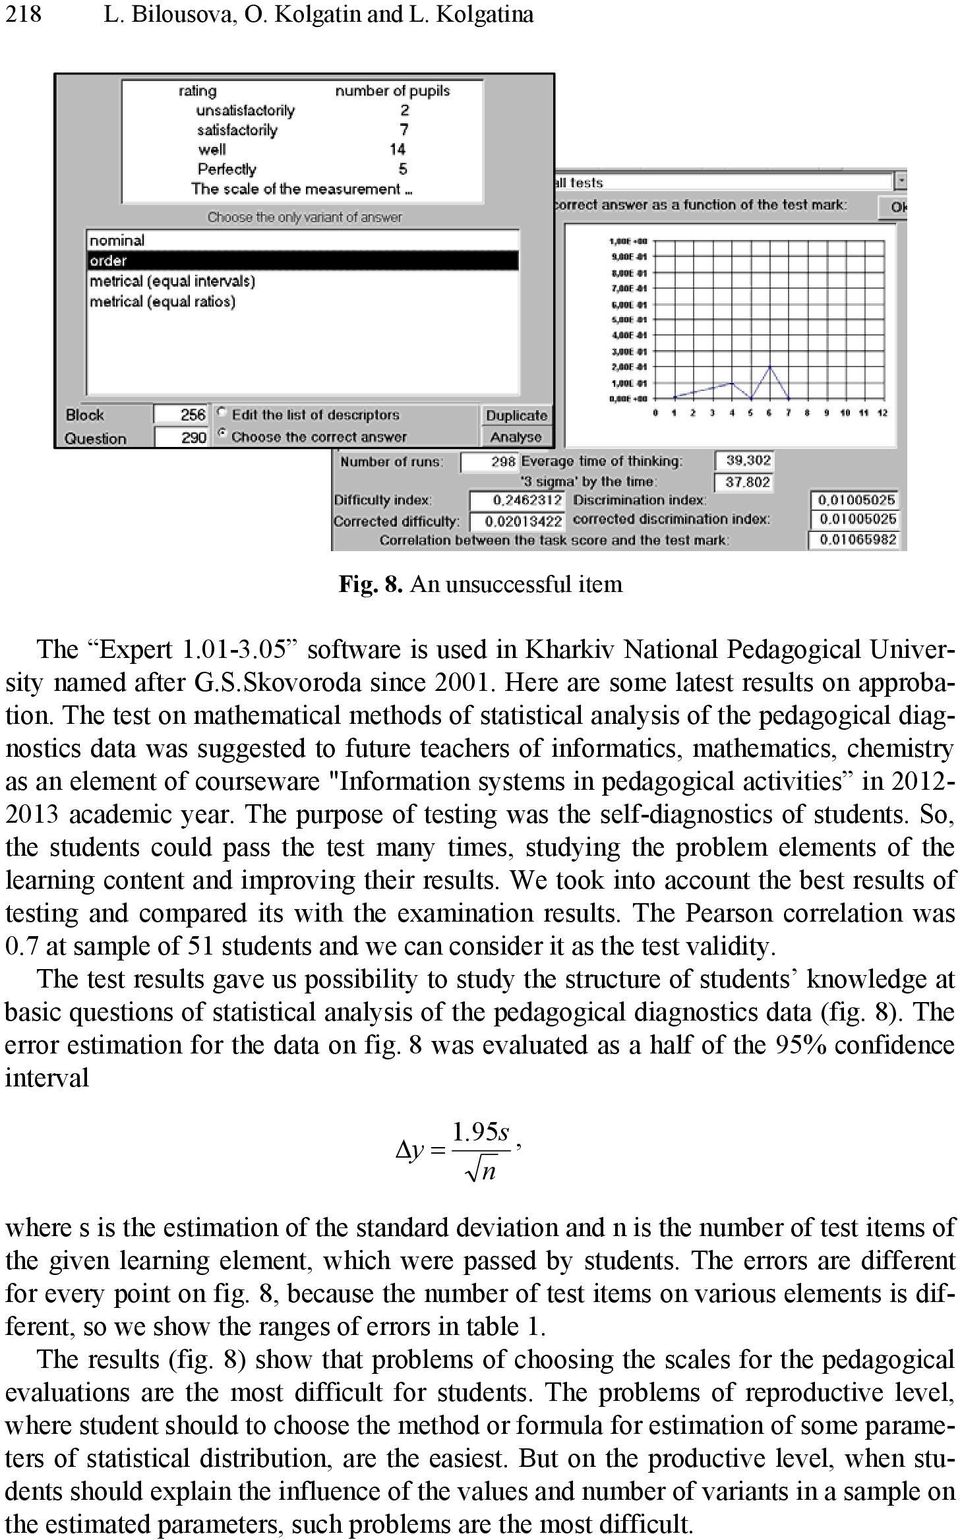 The test on mathematical methods of statistical analysis of the pedagogical diagnostics data was suggested to future teachers of informatics, mathematics, chemistry as an element of courseware